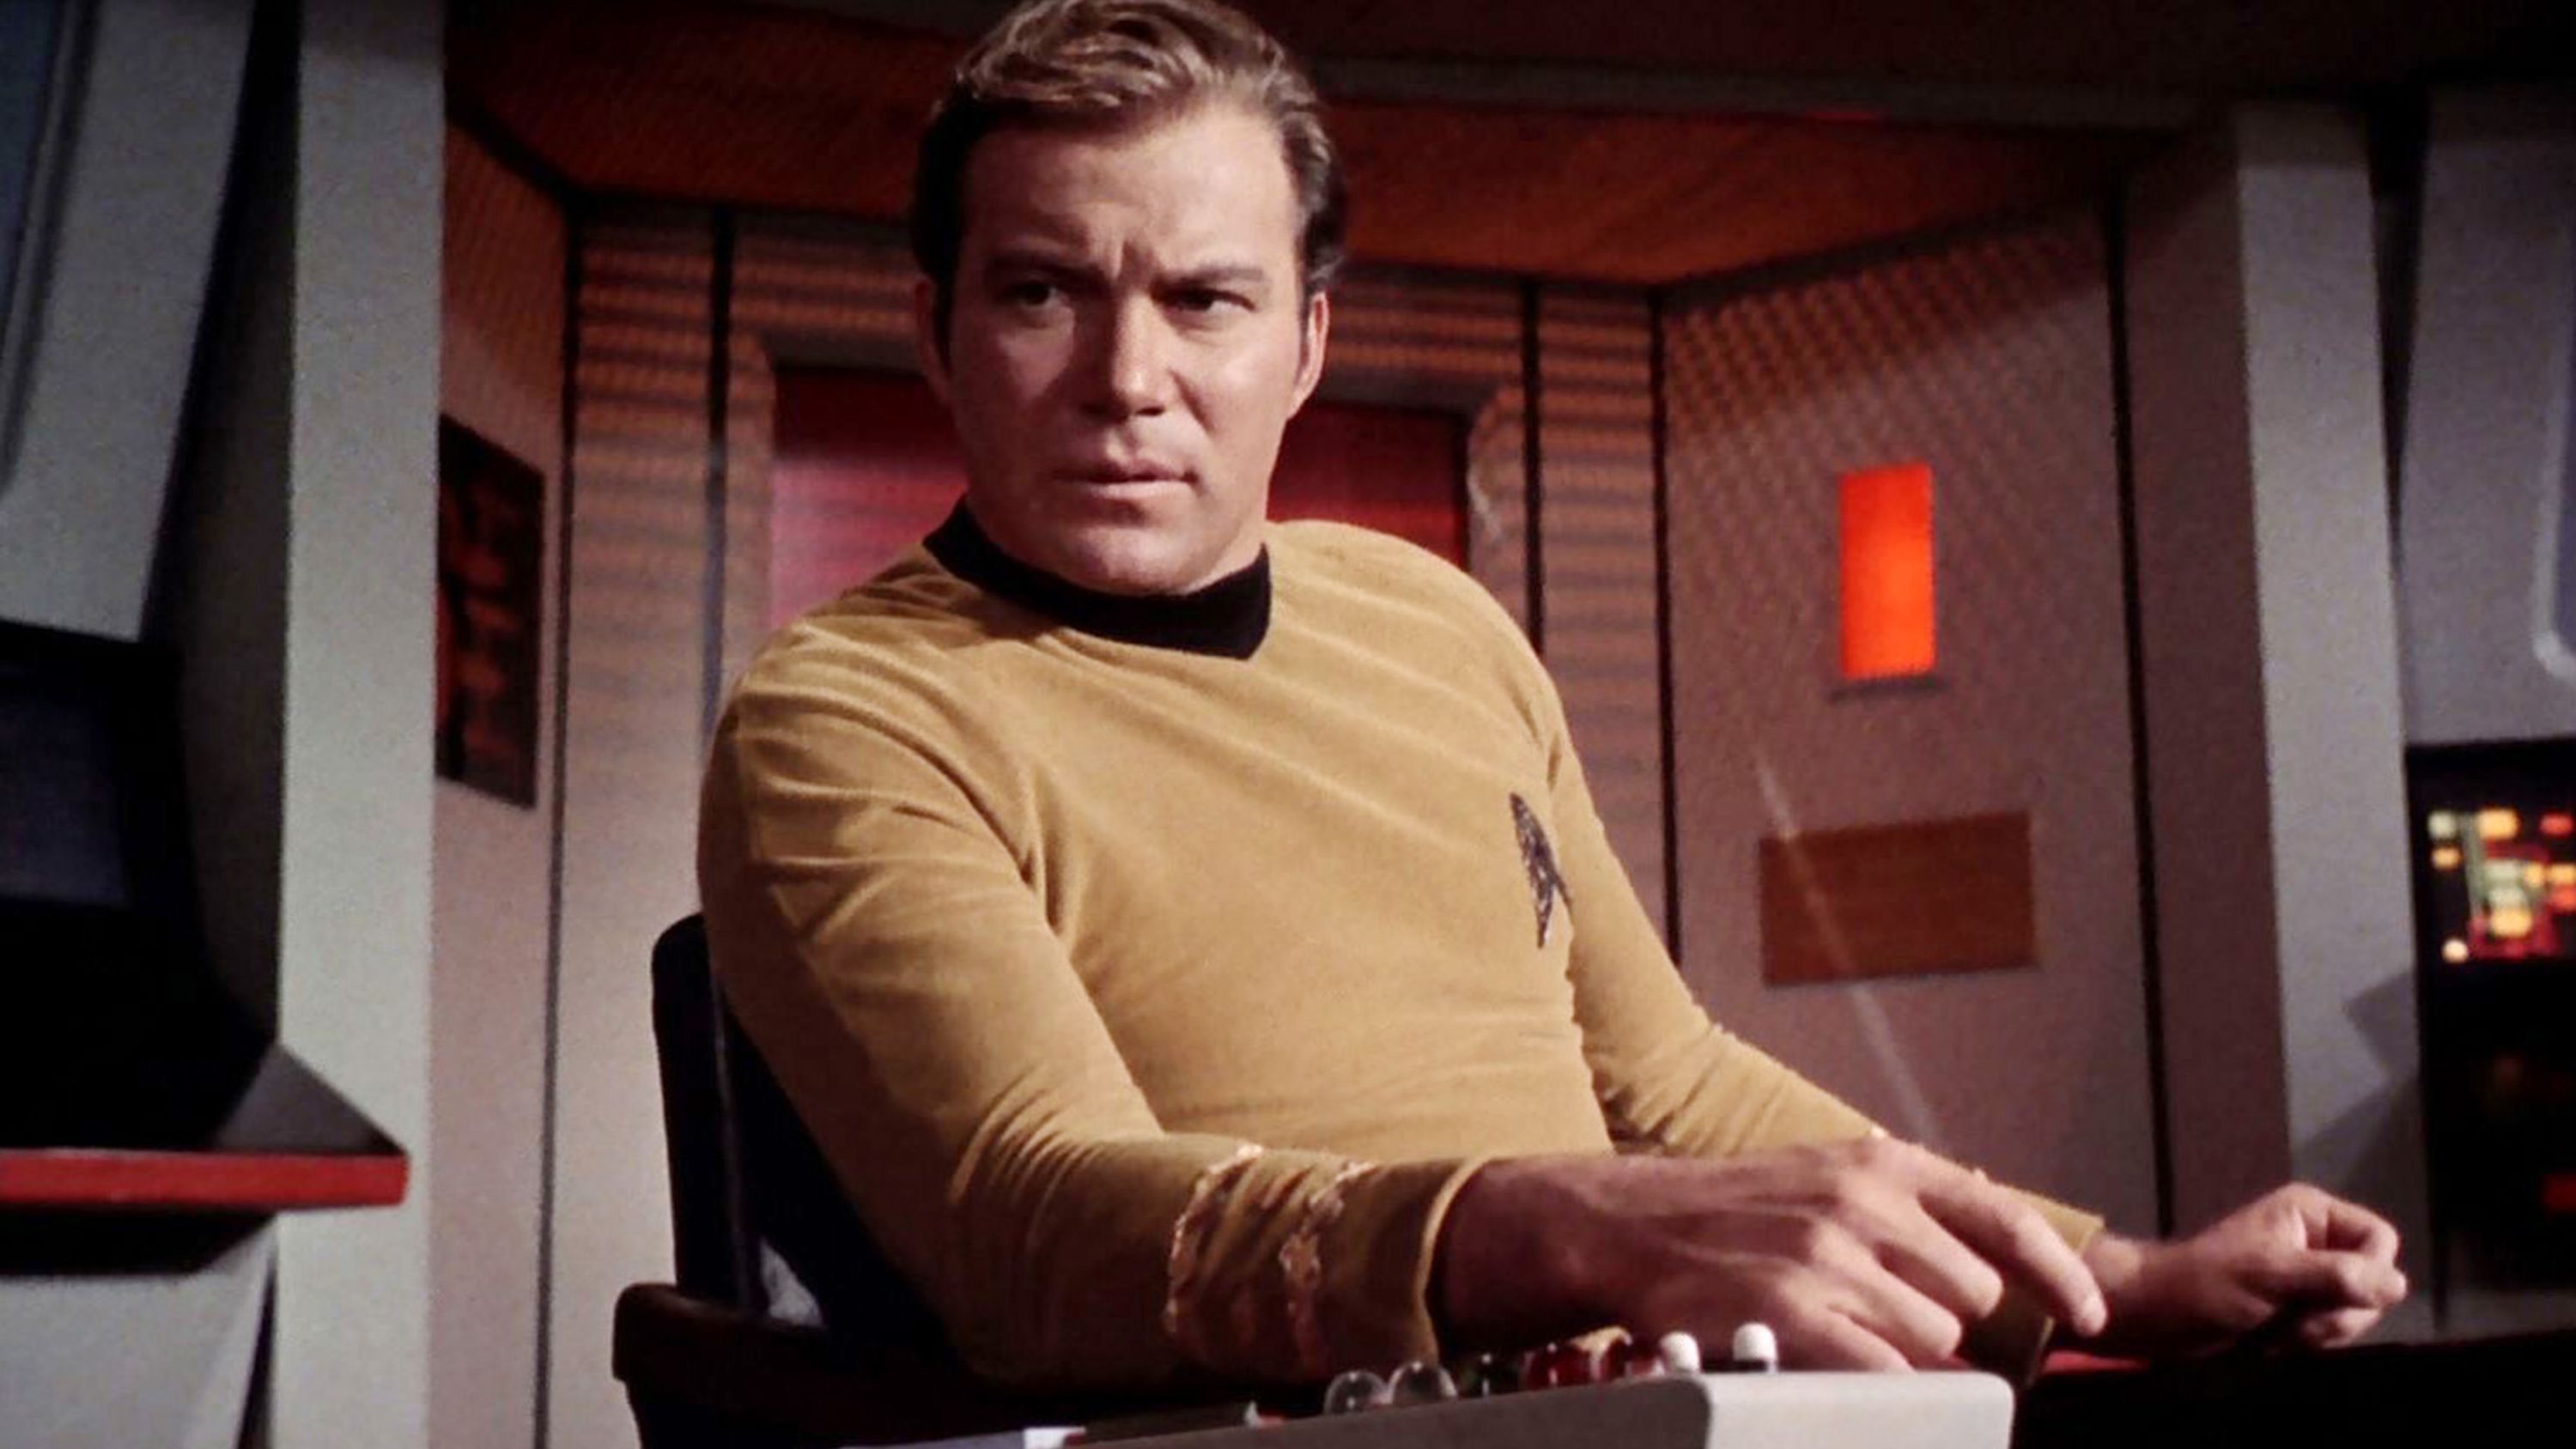 William Shatner plays Captain James T. Kirk in a 1968 "Star Trek" episode. He starred on the show from 1966-1969 and played Kirk in many of the "Star Trek" movies.